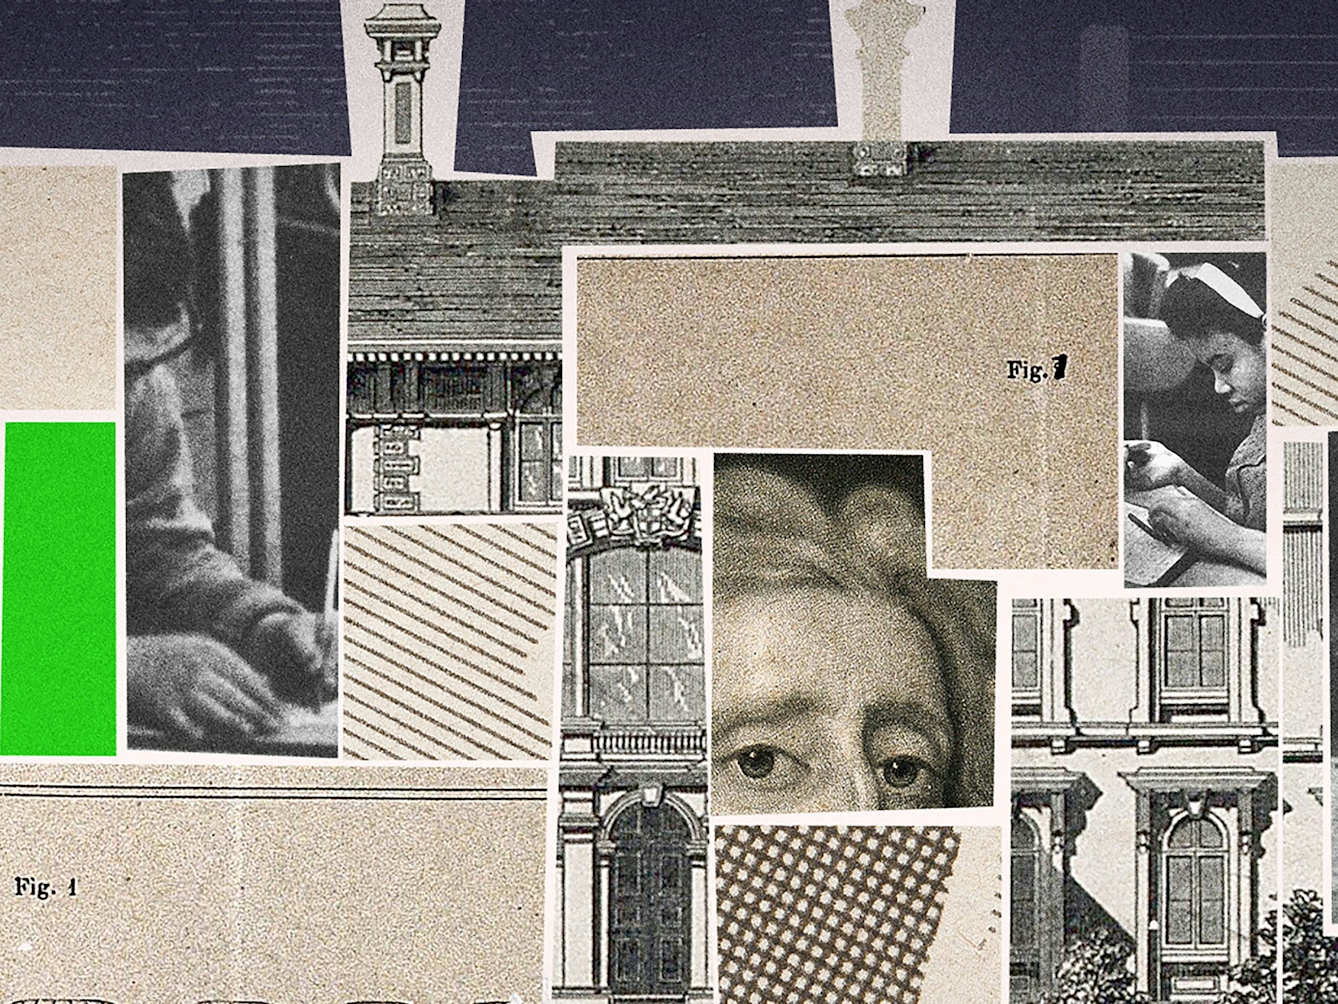 Crop from a larger digital collage. Shown is a building, labelled 'City of London Orphan School, Brixton'. The building's interior is filled with different collage elements, including newspaper headlines reading 'Eugenics', 'Second Boer War' and 'Birth Control'. There are also black and white photos of Francis Galton, John Locke and Sidney Webb. The remainder of the building is filled with green and sepia shapes. 